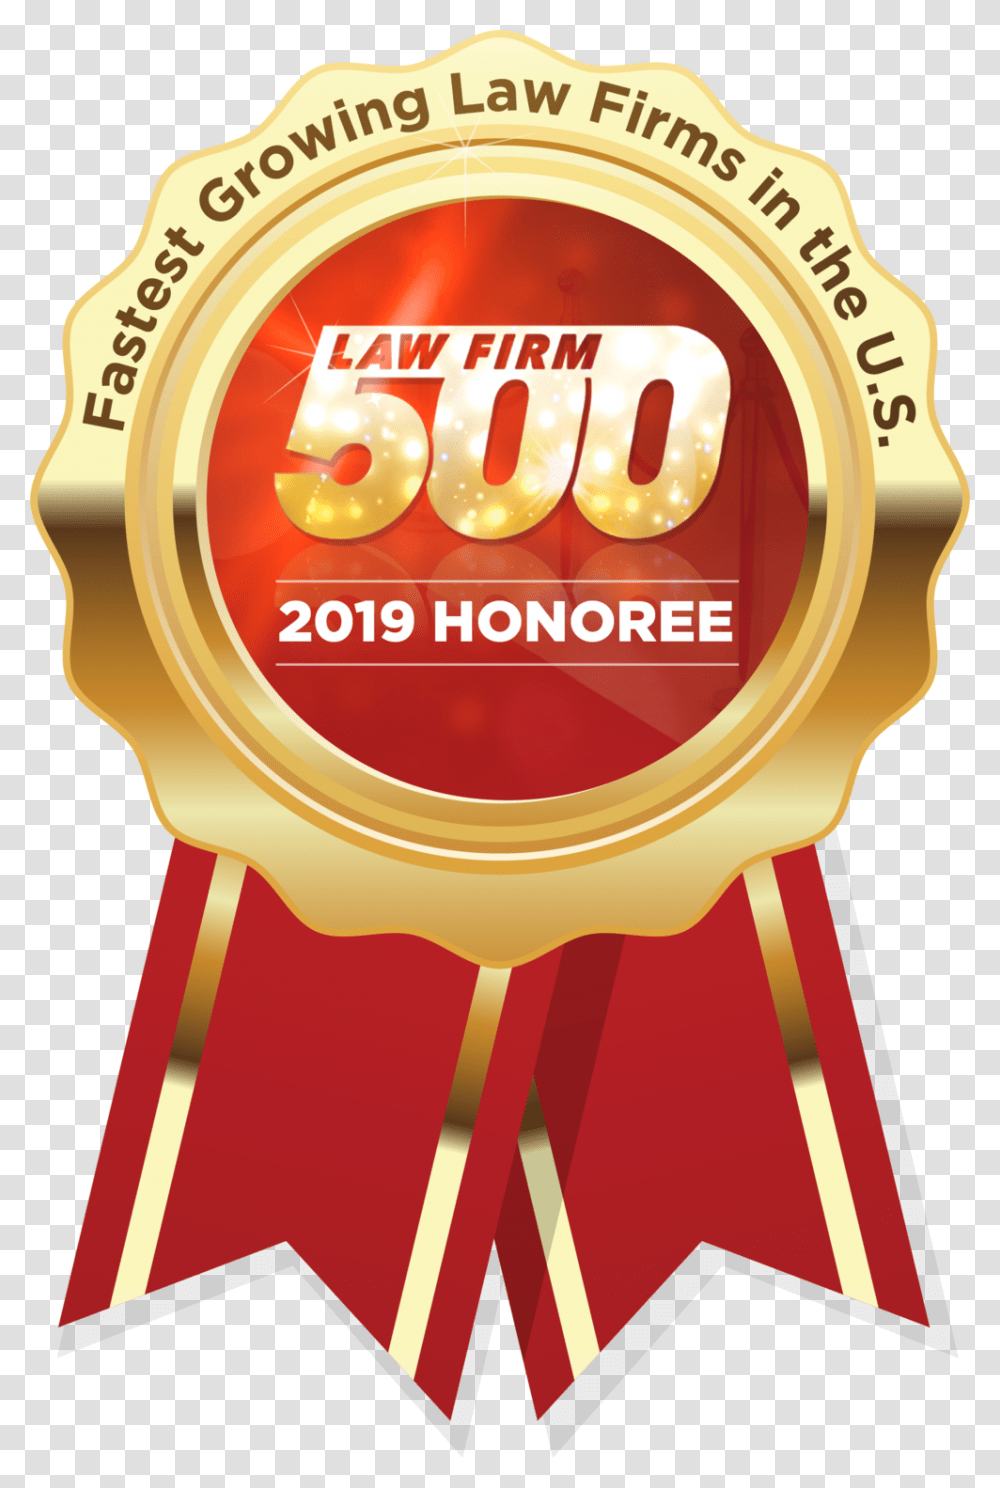 2019 Lf500 Honoree Seal High Res 2019 Law Firm, Gold, Wristwatch, Food Transparent Png